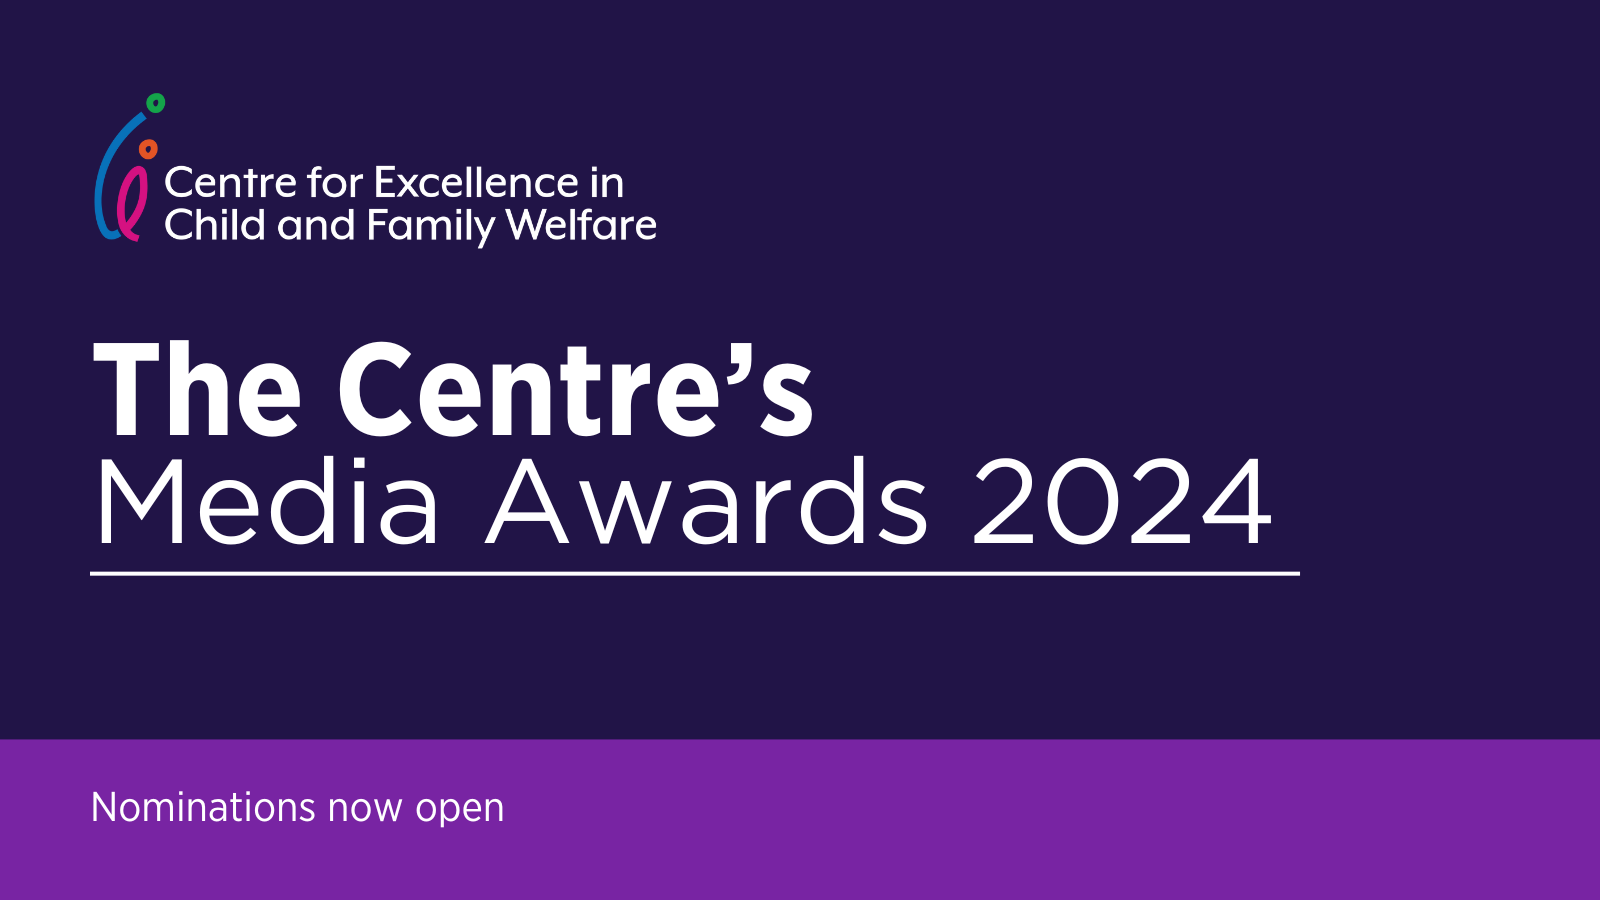 Media Awards 2024 - Nominations are now open